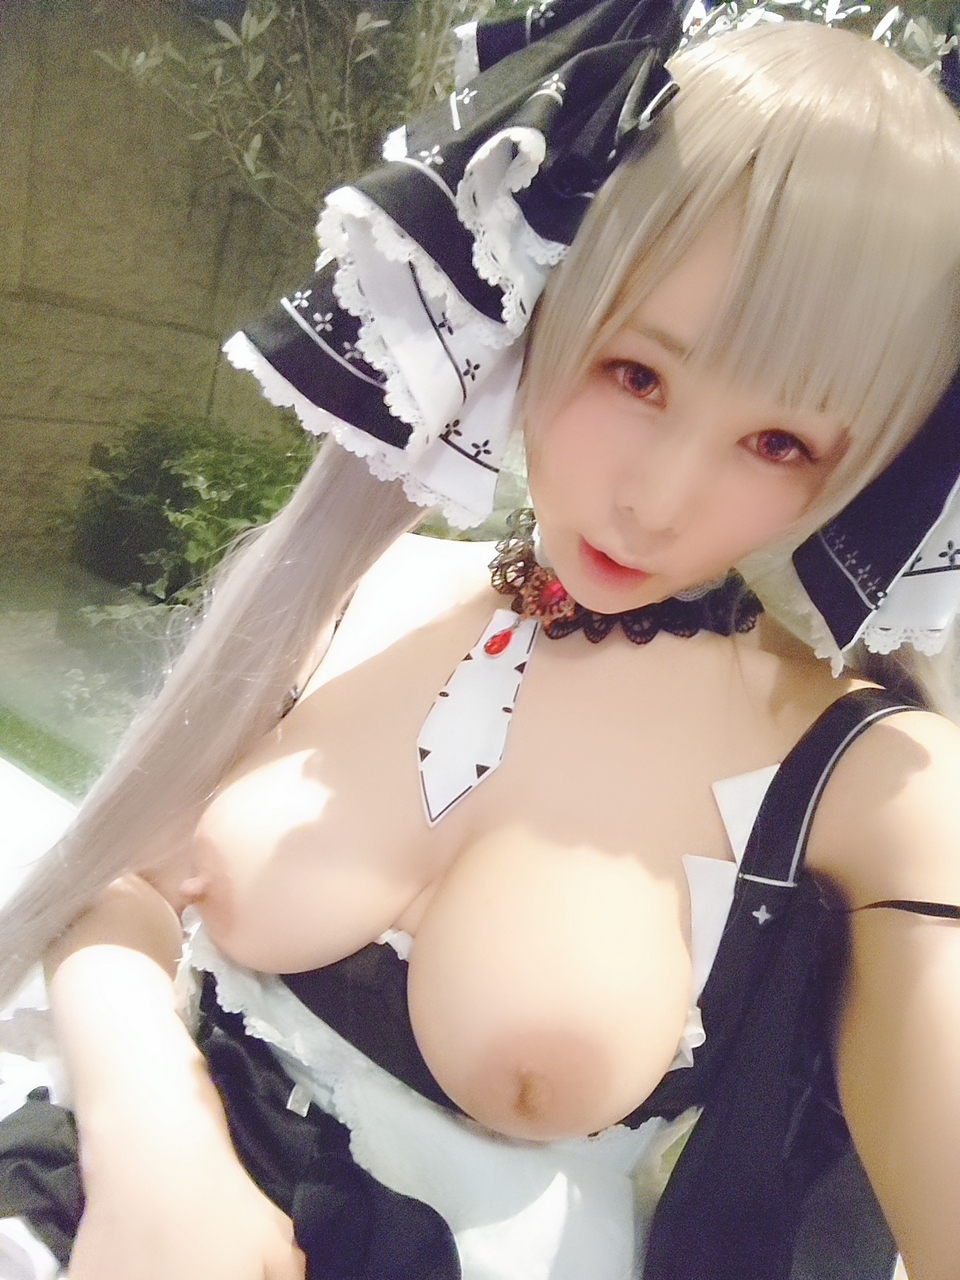 Formidable From Azur Lane By Yu